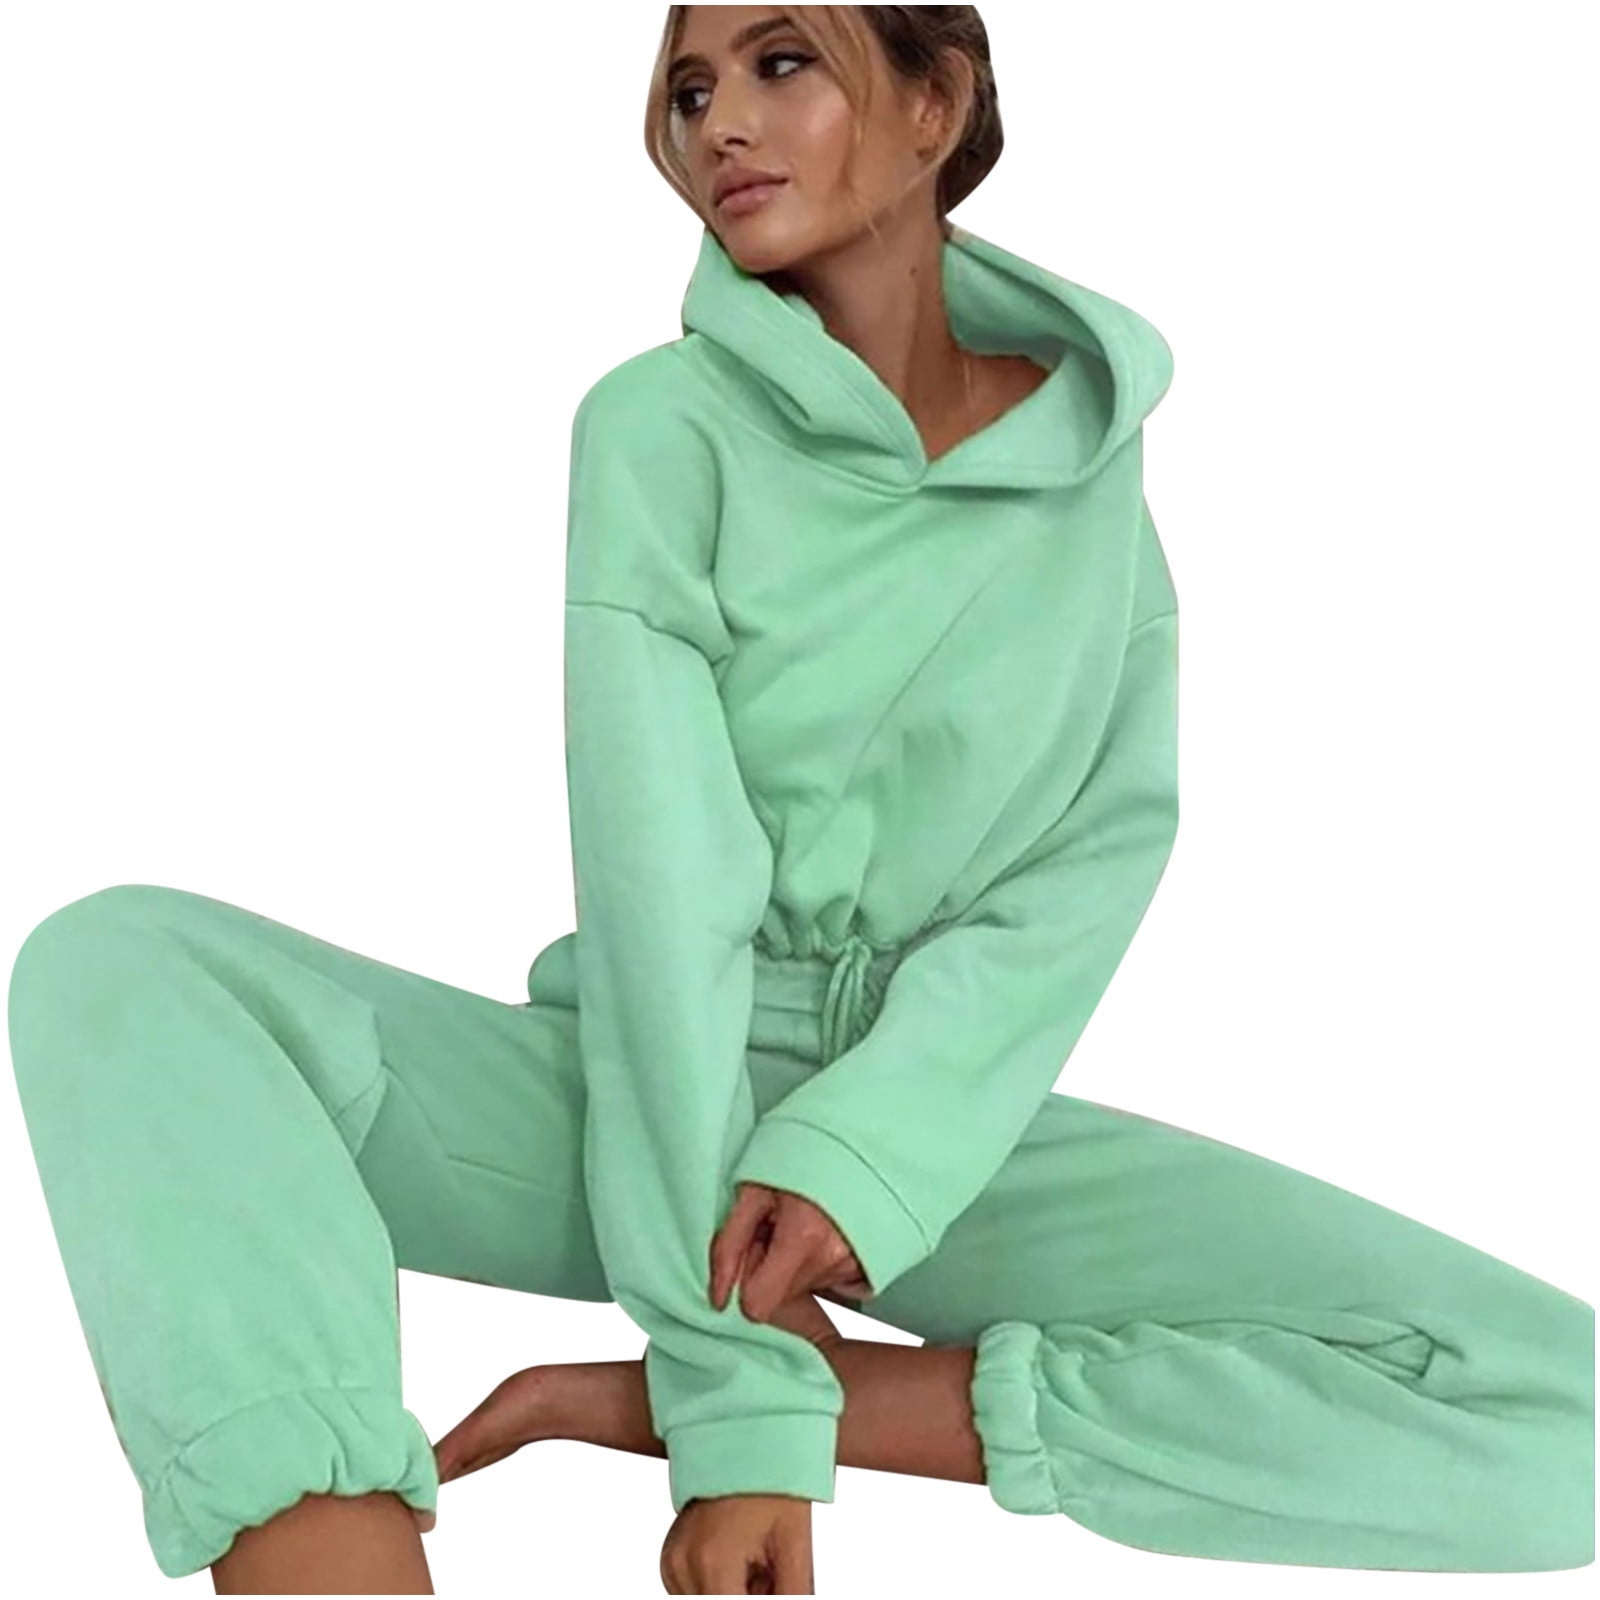 Jogging Suits for Women Sweatsuit 2 Piece Outfits Long Sleeve ...